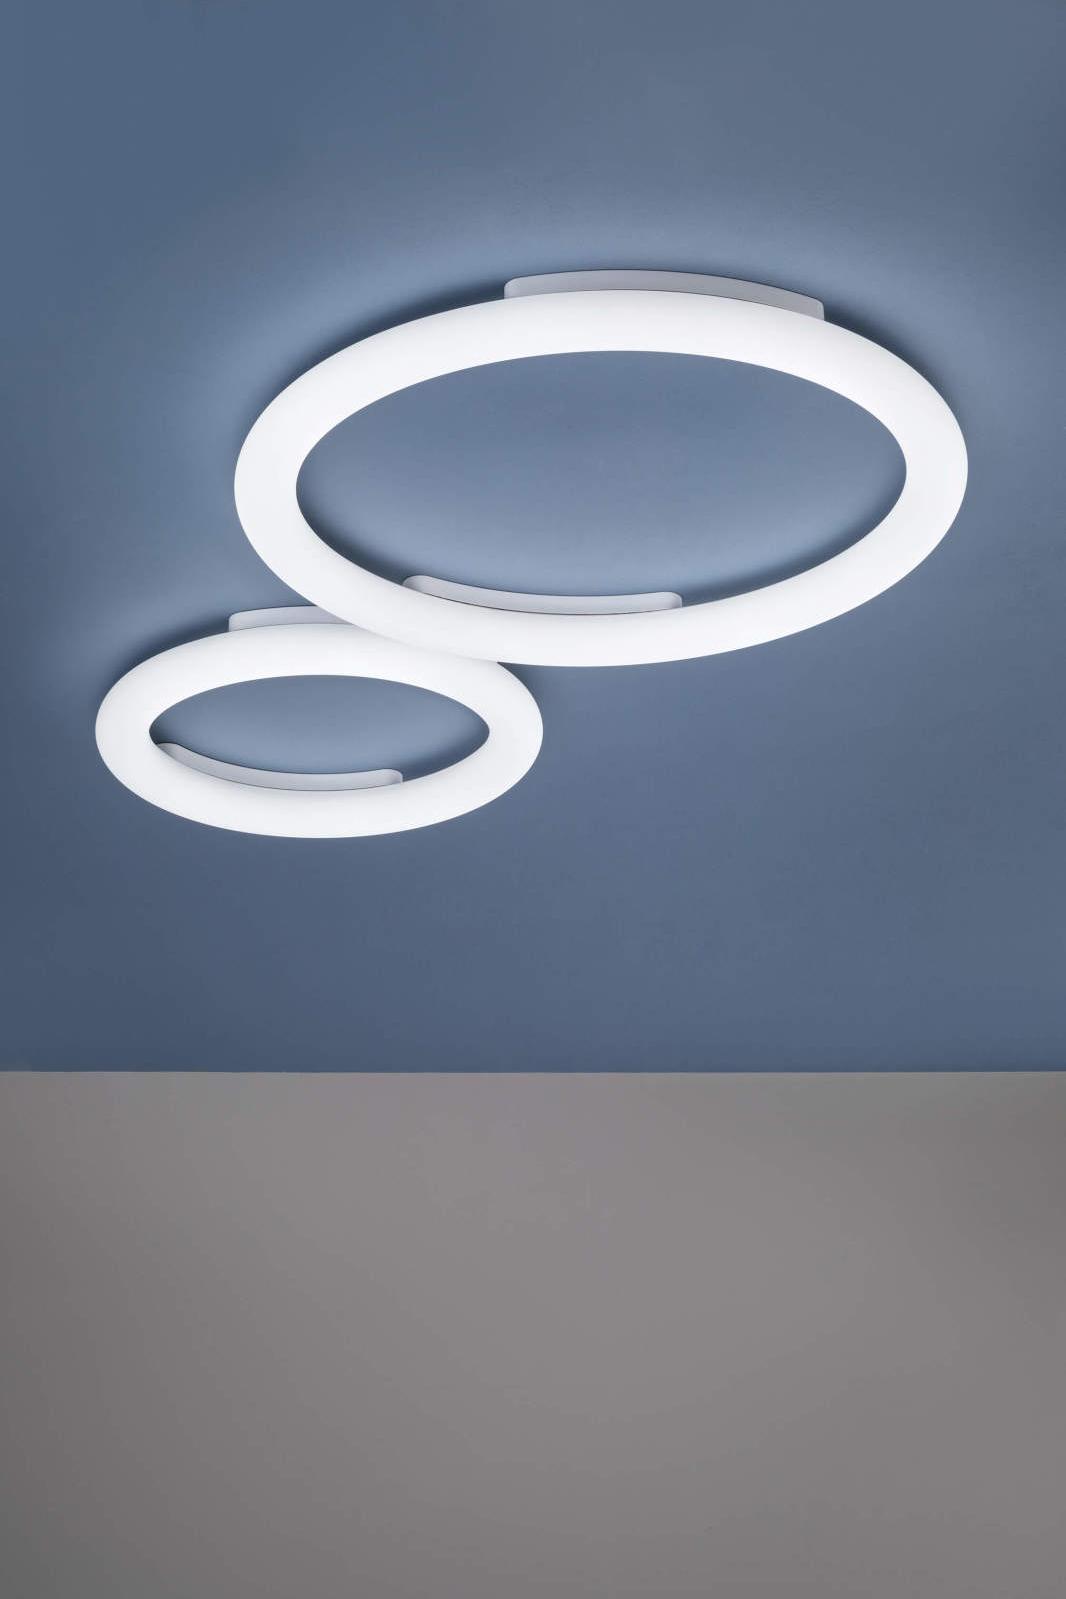 Gallery Product Polo Ceiling Linealightgroup 1280X1920 2